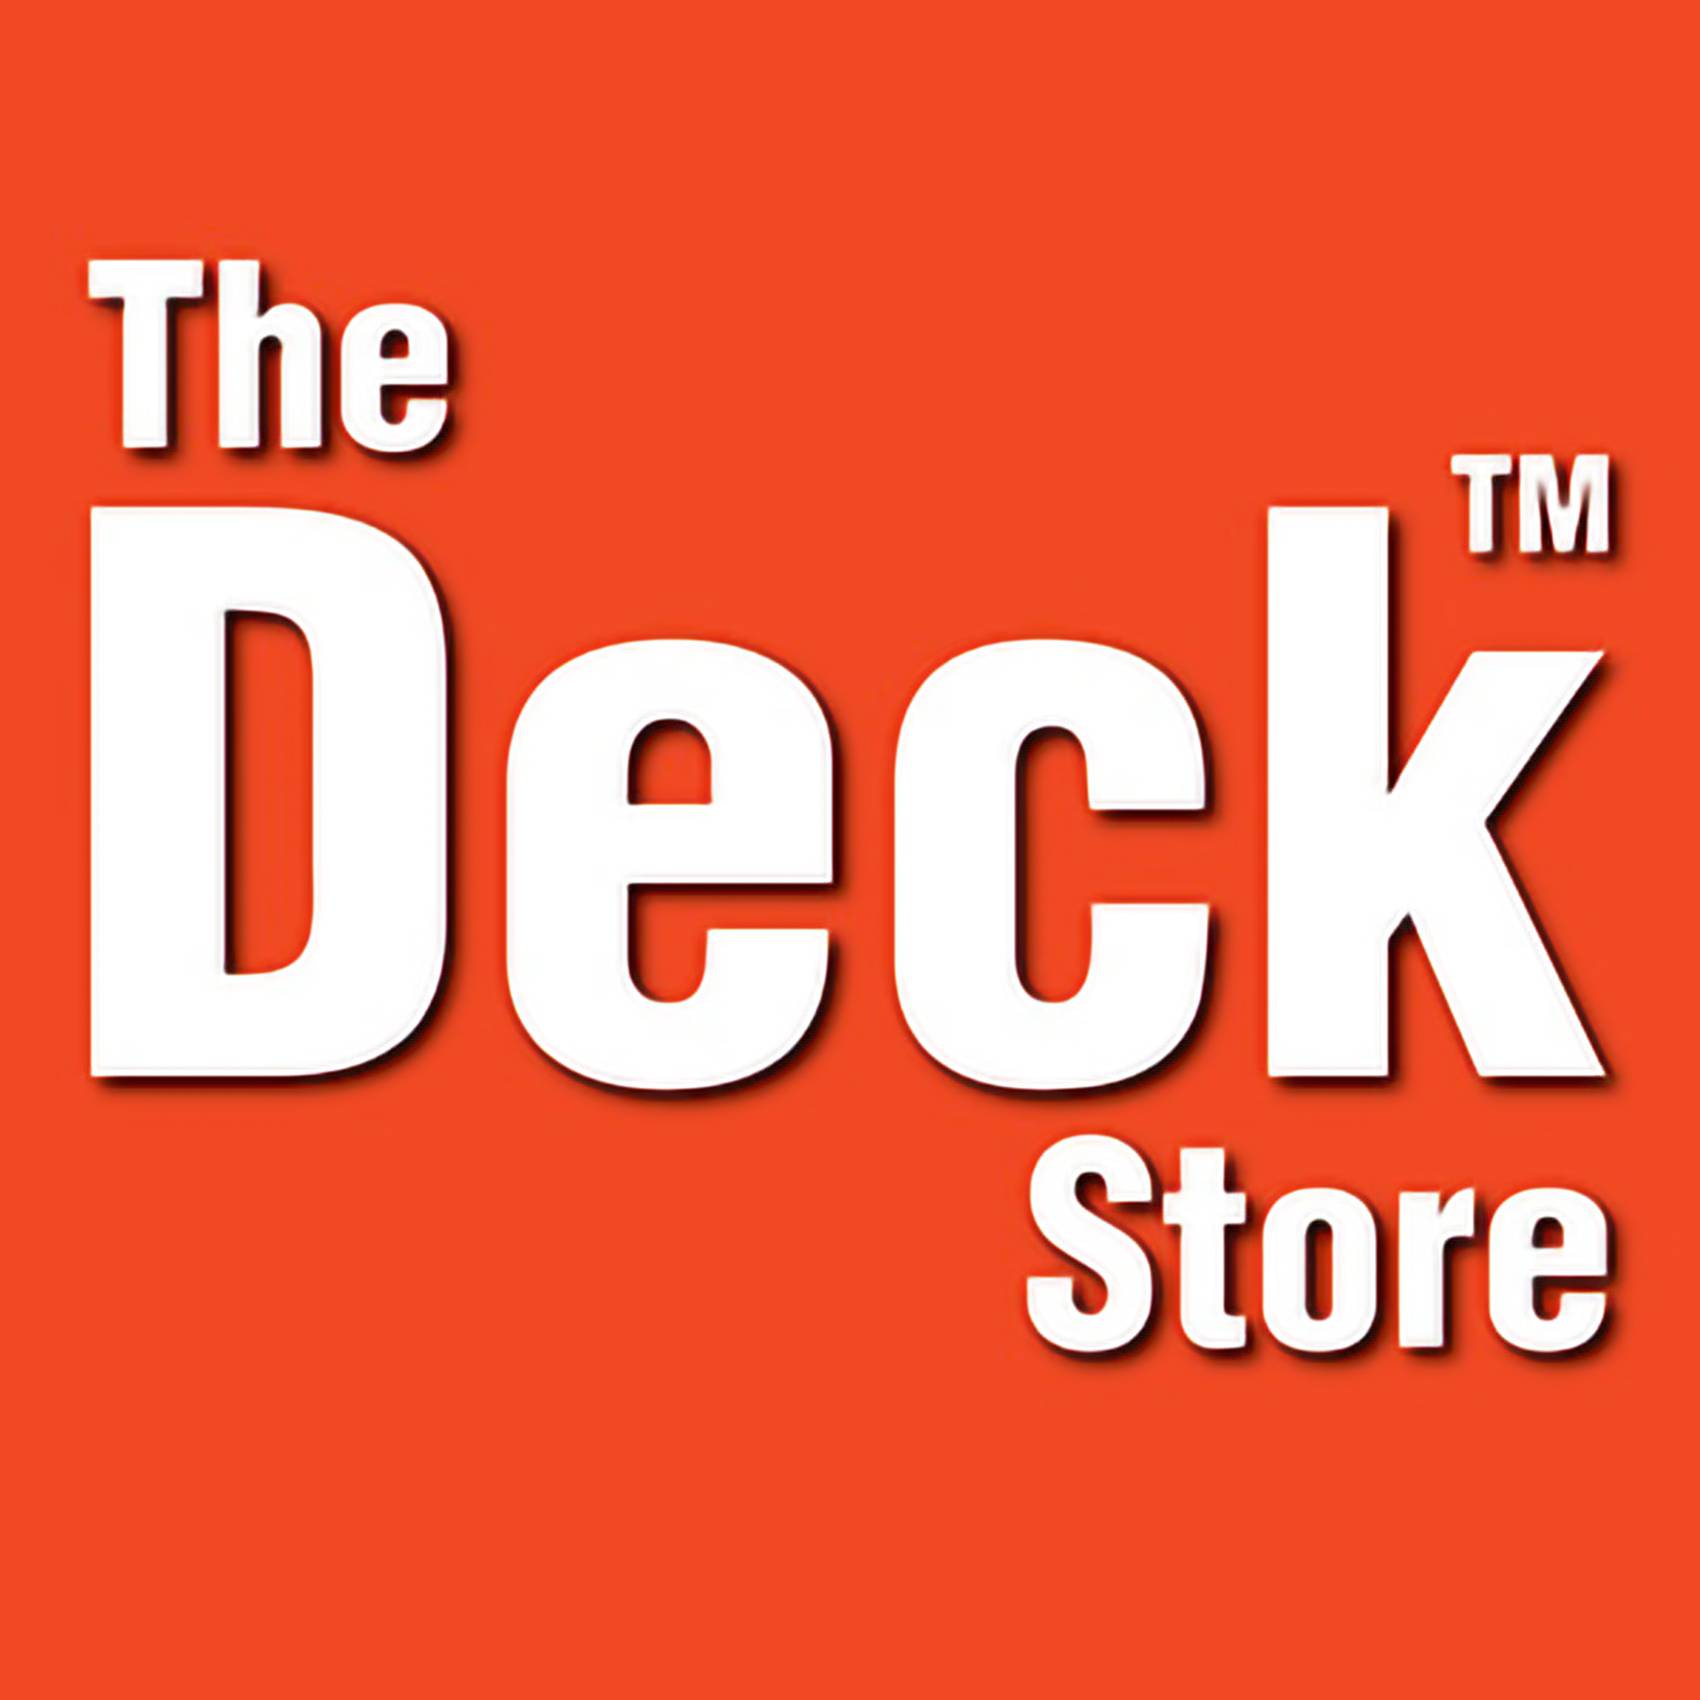 the deck store logo